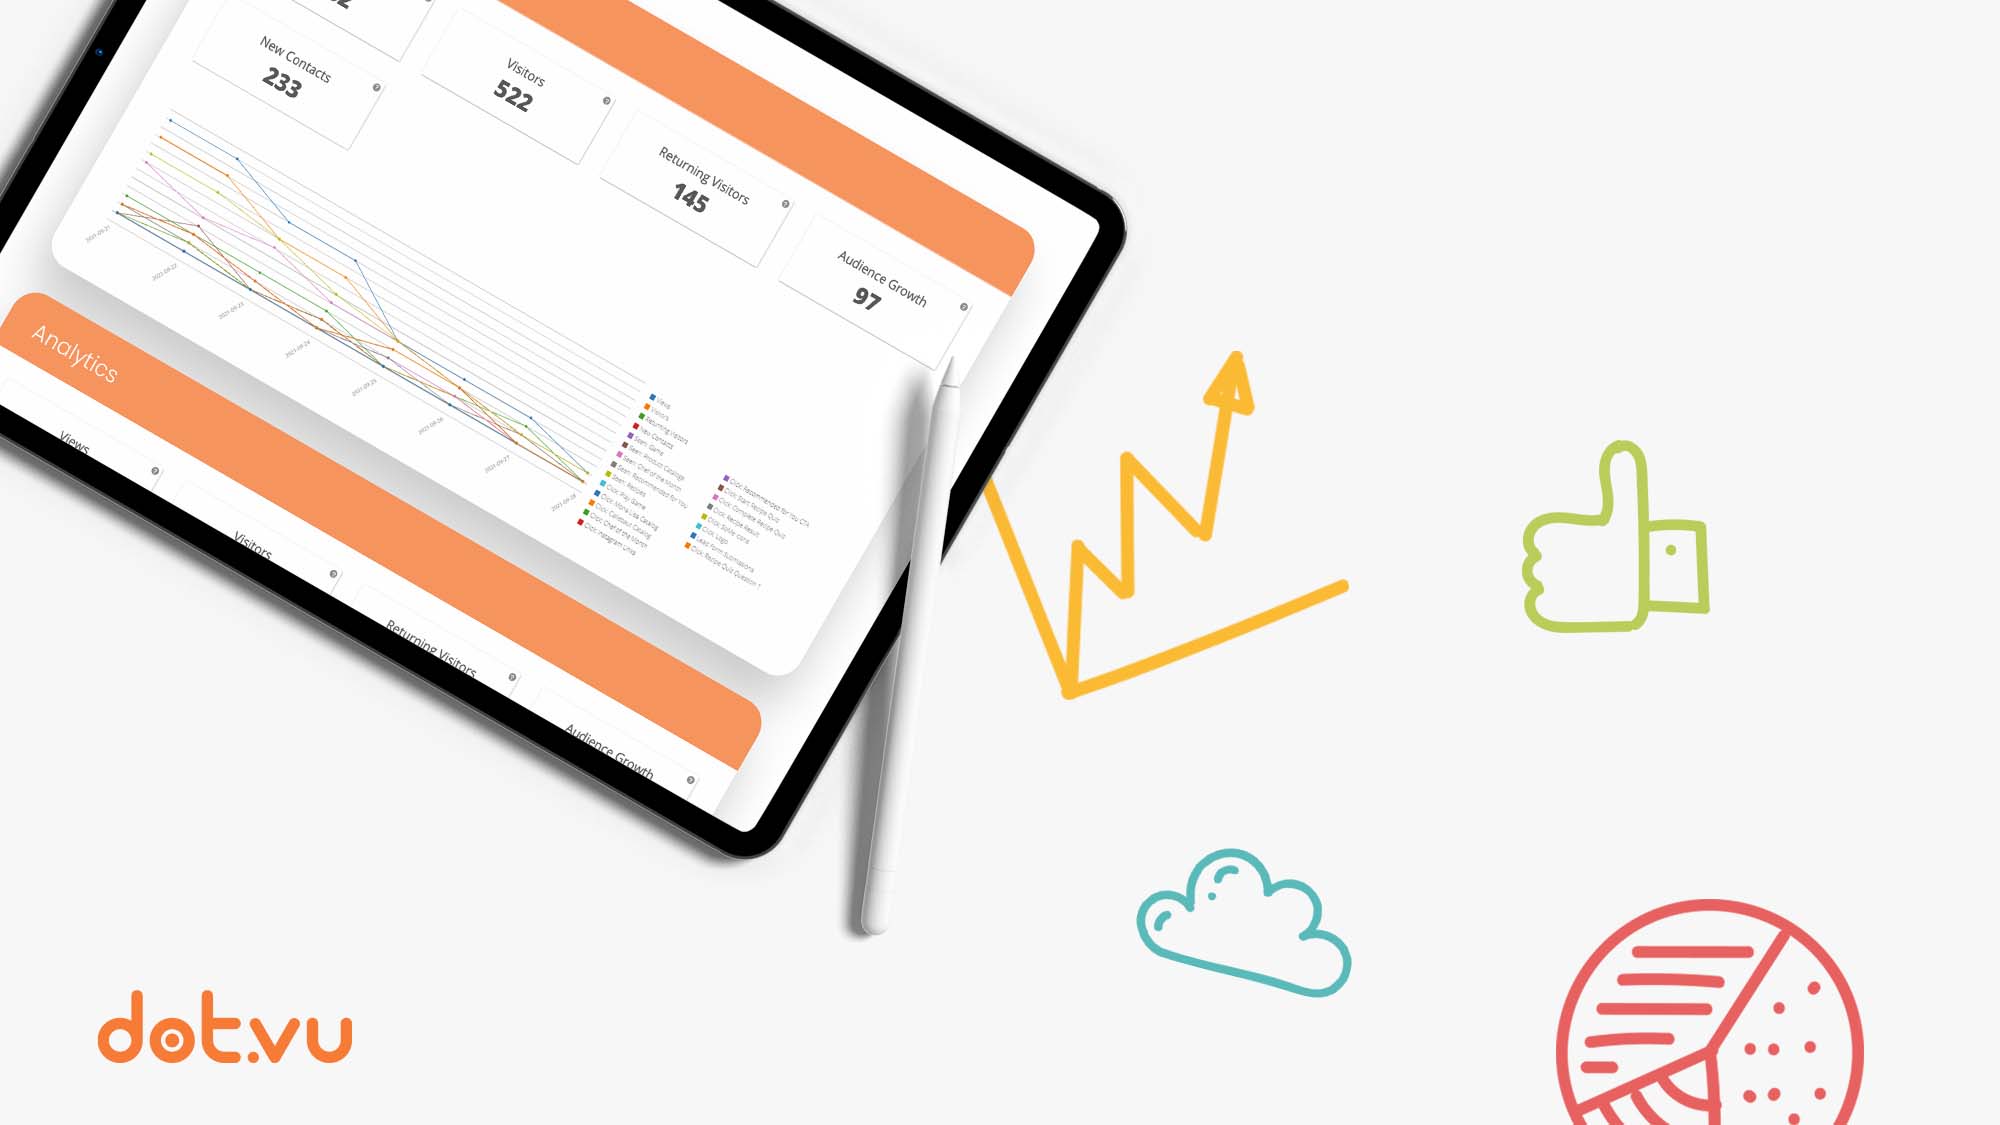 Dot.vu Analytics gives you the tools to track any interaction that is important for your business. Uncover new insights and get to know your customers.